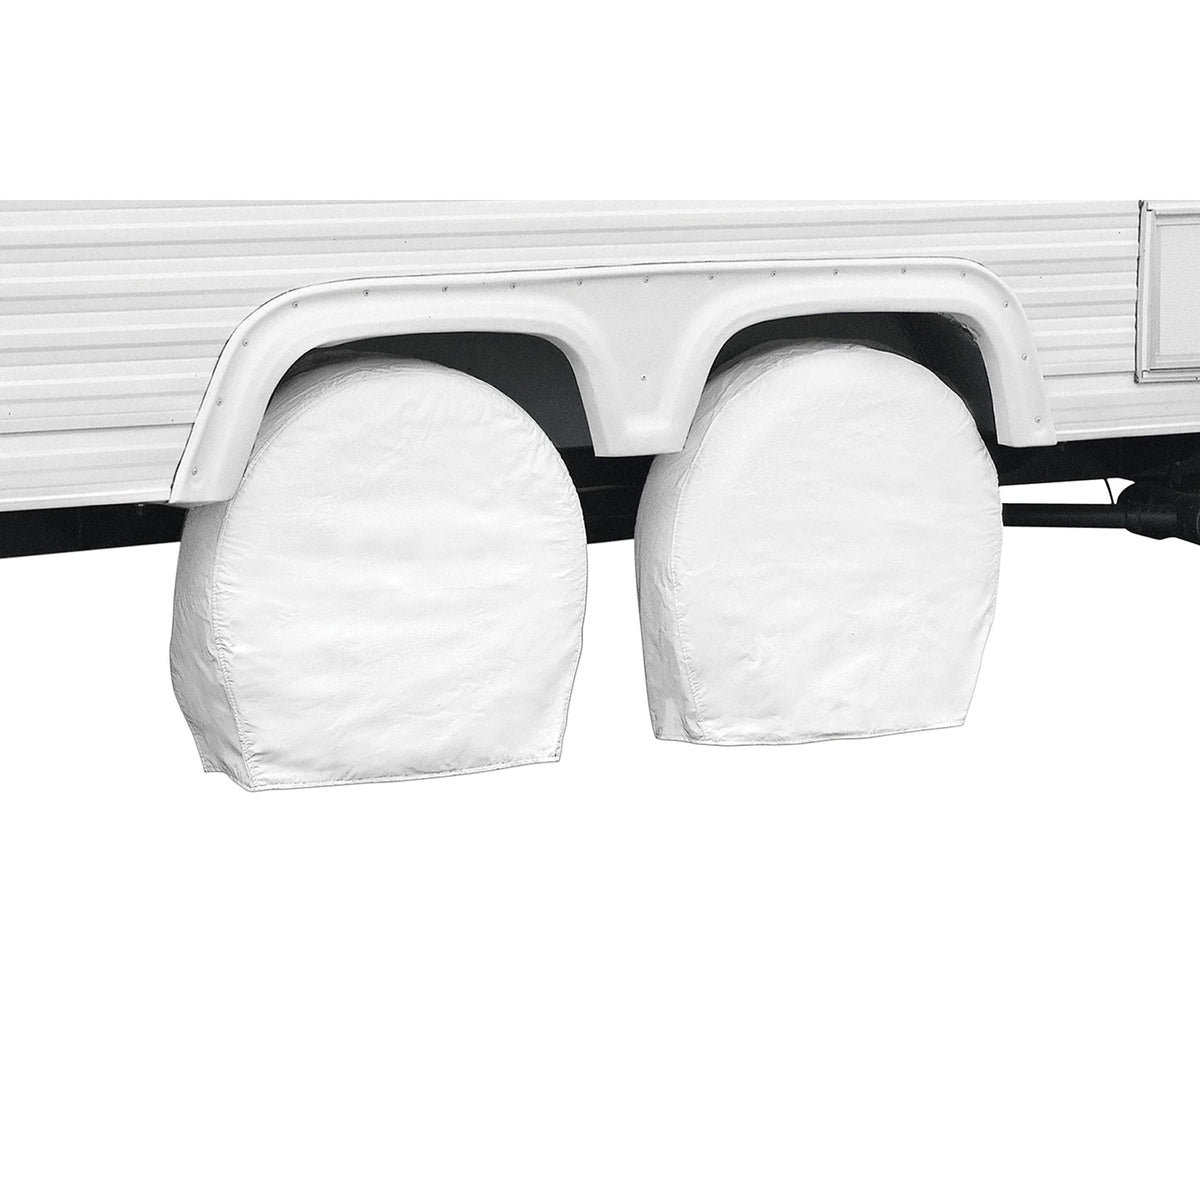 Classic Accessories Qualifies for Free Shipping Classic Accessories Over Drive RV Wheel Cover 24-27" x 8.5" White #76240